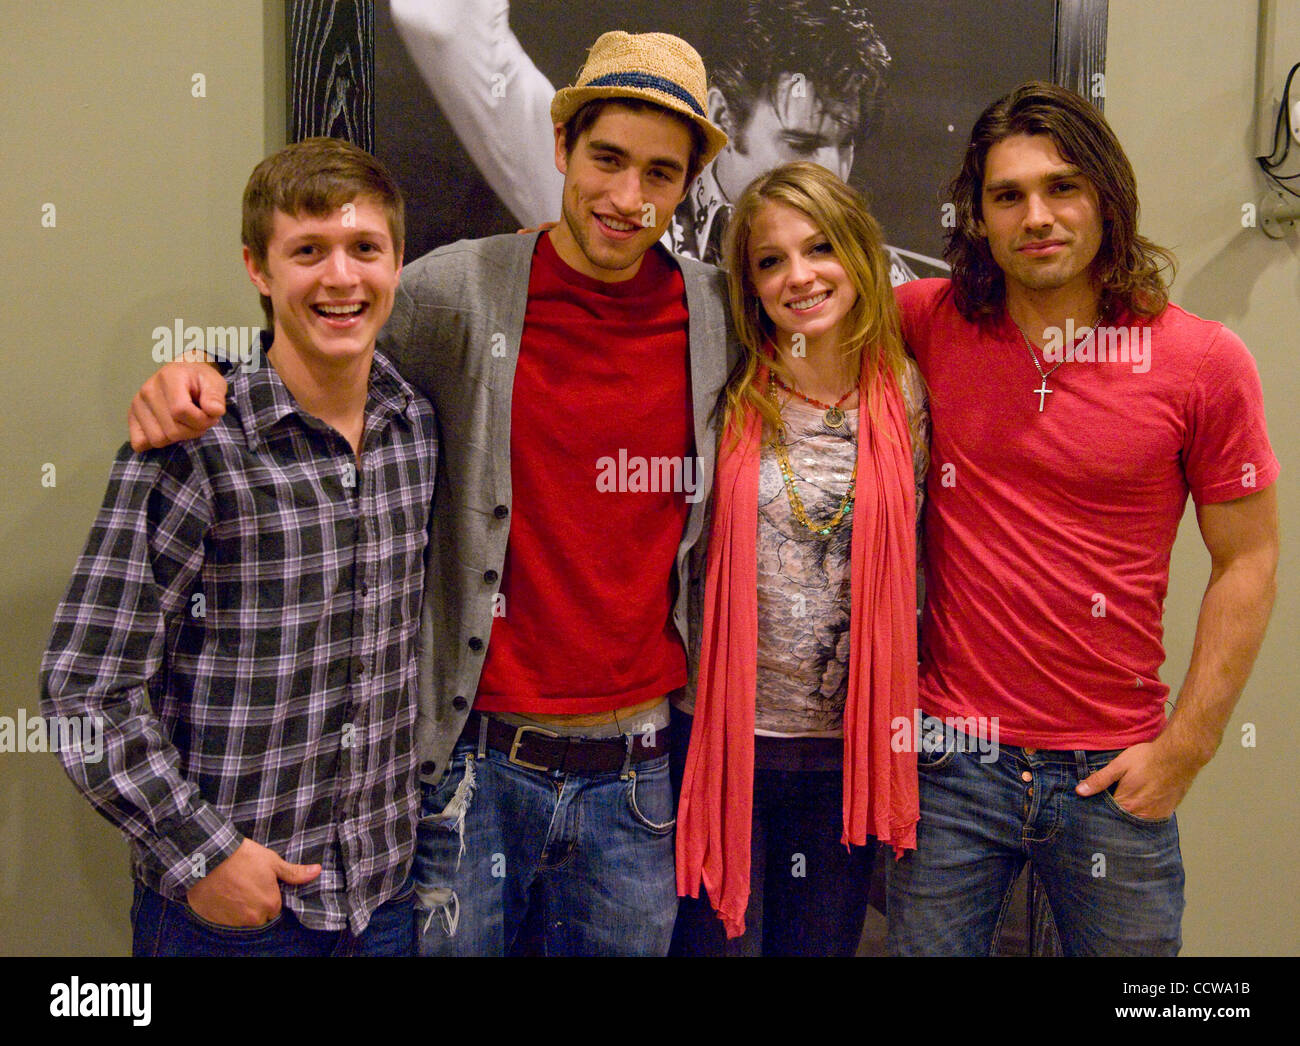 April 2, 2010 - Beverly Hills, California, USA -Latest American Idol Contestant Castoff DIDI BENAMI visits the  'If I Can Dream'  show.(L-R) ALEX LAMBERT,BEN ELLIOT,DIDI BENAMI,JUSTIN GASTON. The reality show follows performers who live together into a house wired with 56 cameras. The footage is bro Stock Photo